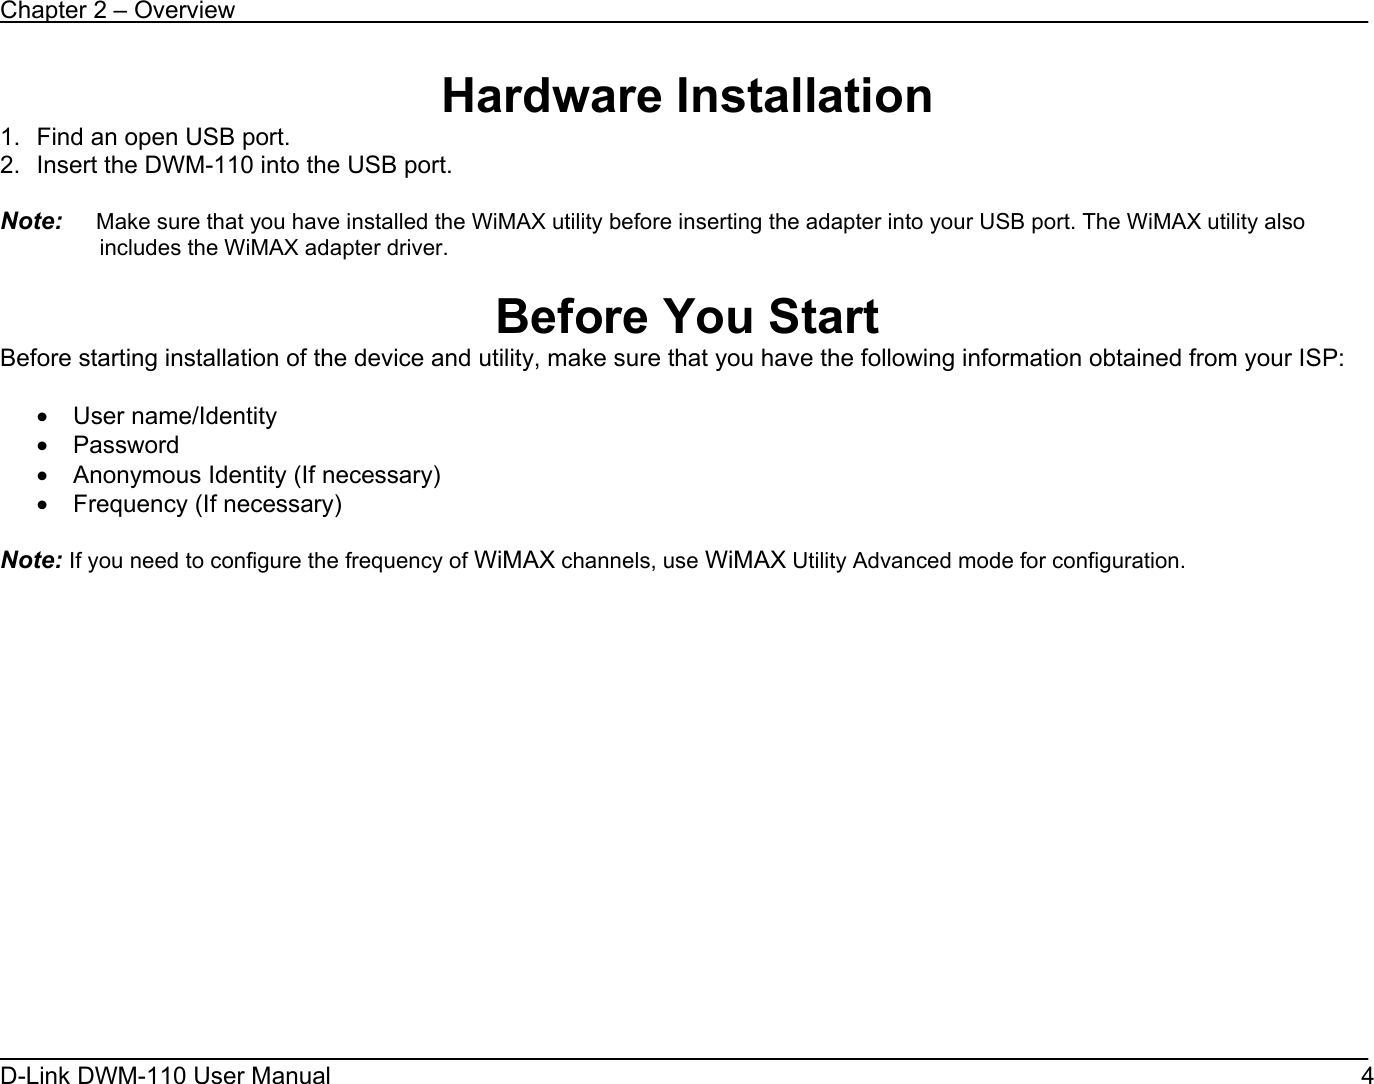 Chapter 2 – Overview D-Link DWM-110 User Manual   4 Hardware Installation 1.  Find an open USB port.  2.  Insert the DWM-110 into the USB port.  Note:     Make sure that you have installed the WiMAX utility before inserting the adapter into your USB port. The WiMAX utility also includes the WiMAX adapter driver.  Before You Start Before starting installation of the device and utility, make sure that you have the following information obtained from your ISP:  • User name/Identity • Password • Anonymous Identity (If necessary) • Frequency (If necessary)  Note: If you need to configure the frequency of WiMAX channels, use WiMAX Utility Advanced mode for configuration.   